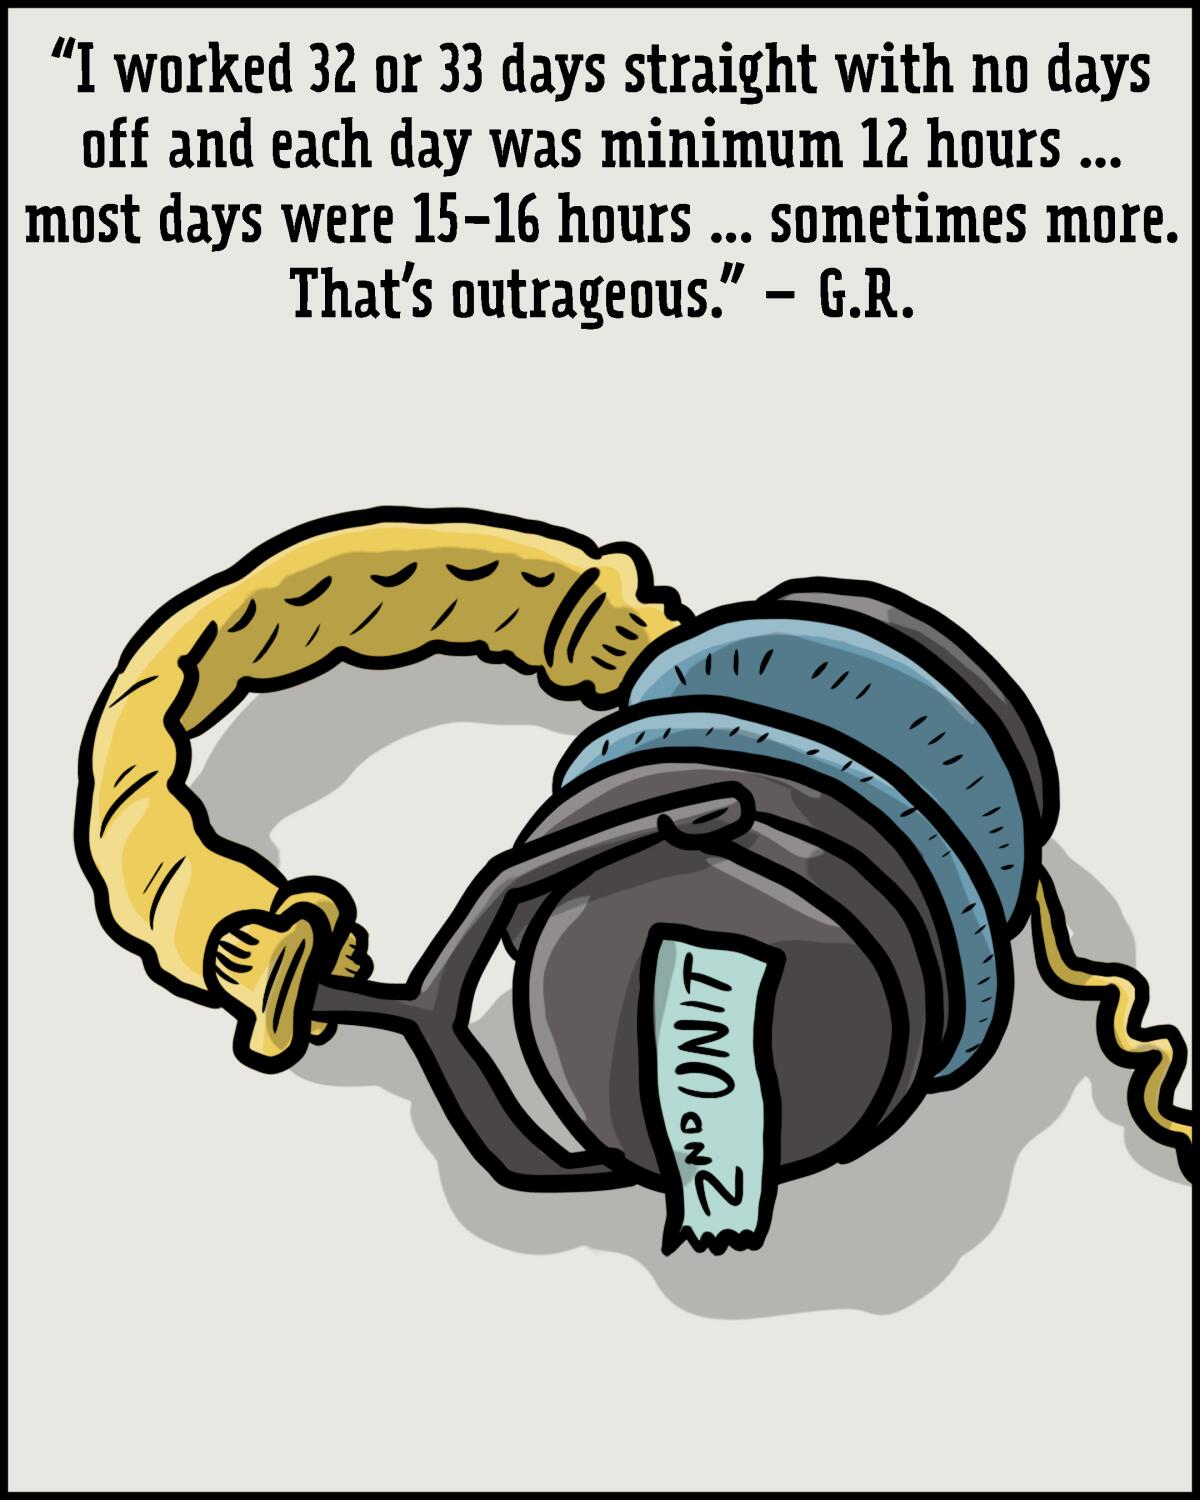 An illustration of professional-quality headphones that say "2nd Unit" on them. 